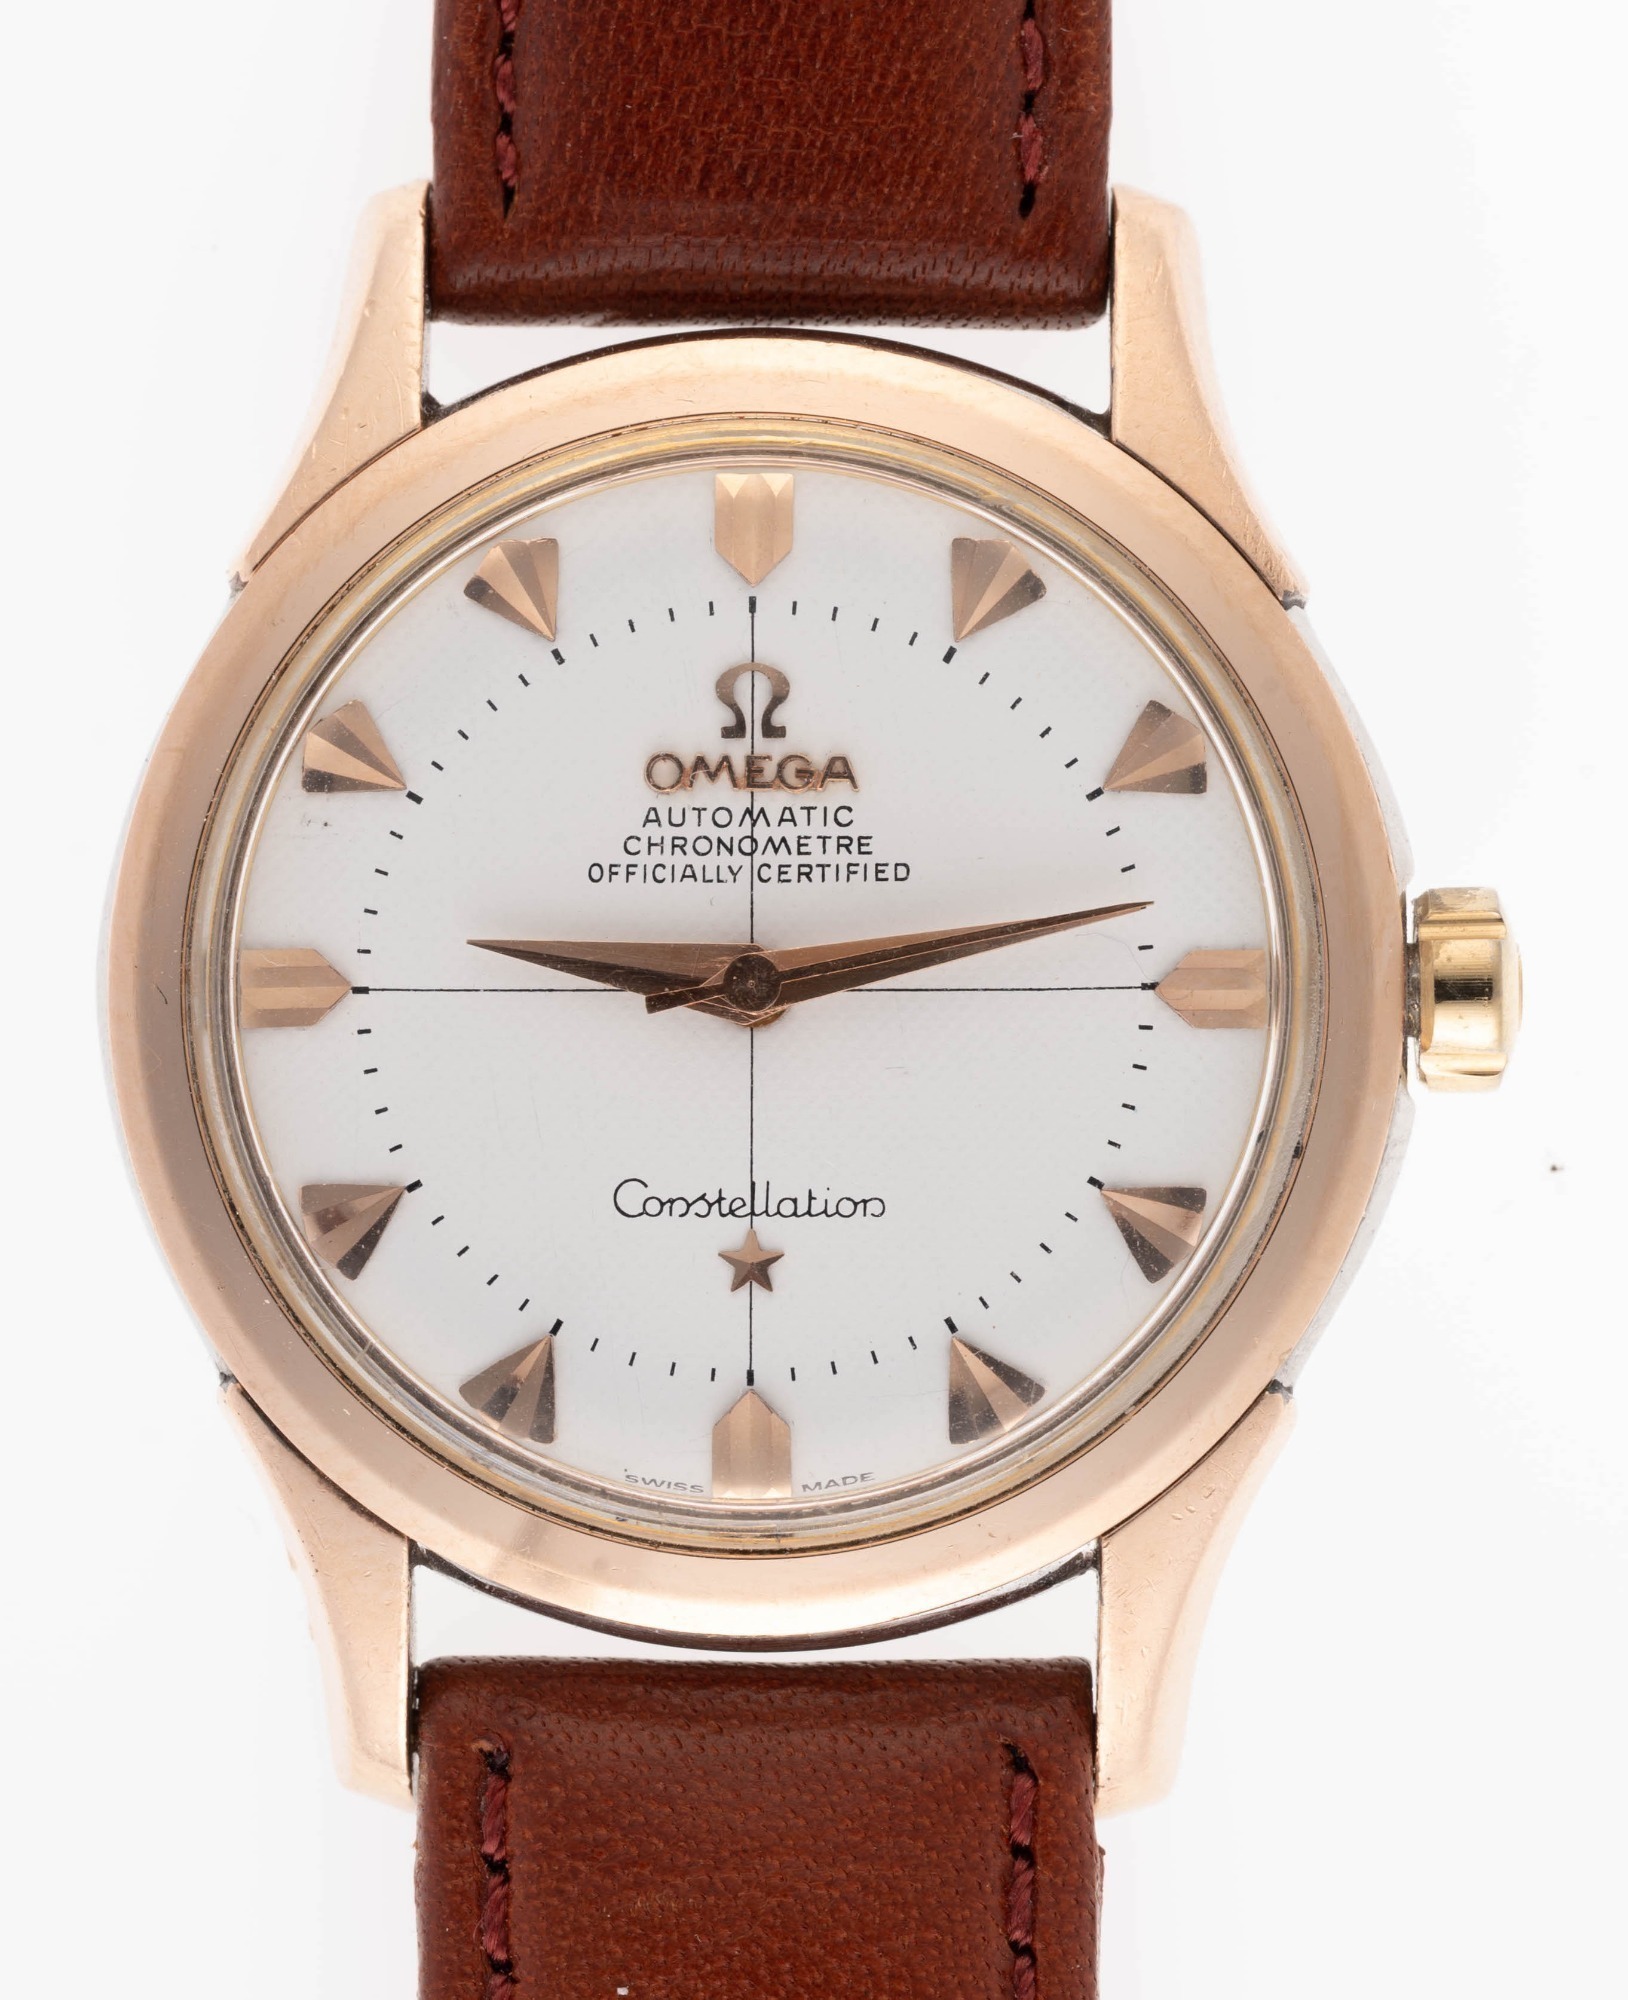 OMEGA CONSTELLATION STEEL AND ROSE GOLD CHRONOMETER WRISTWATCH